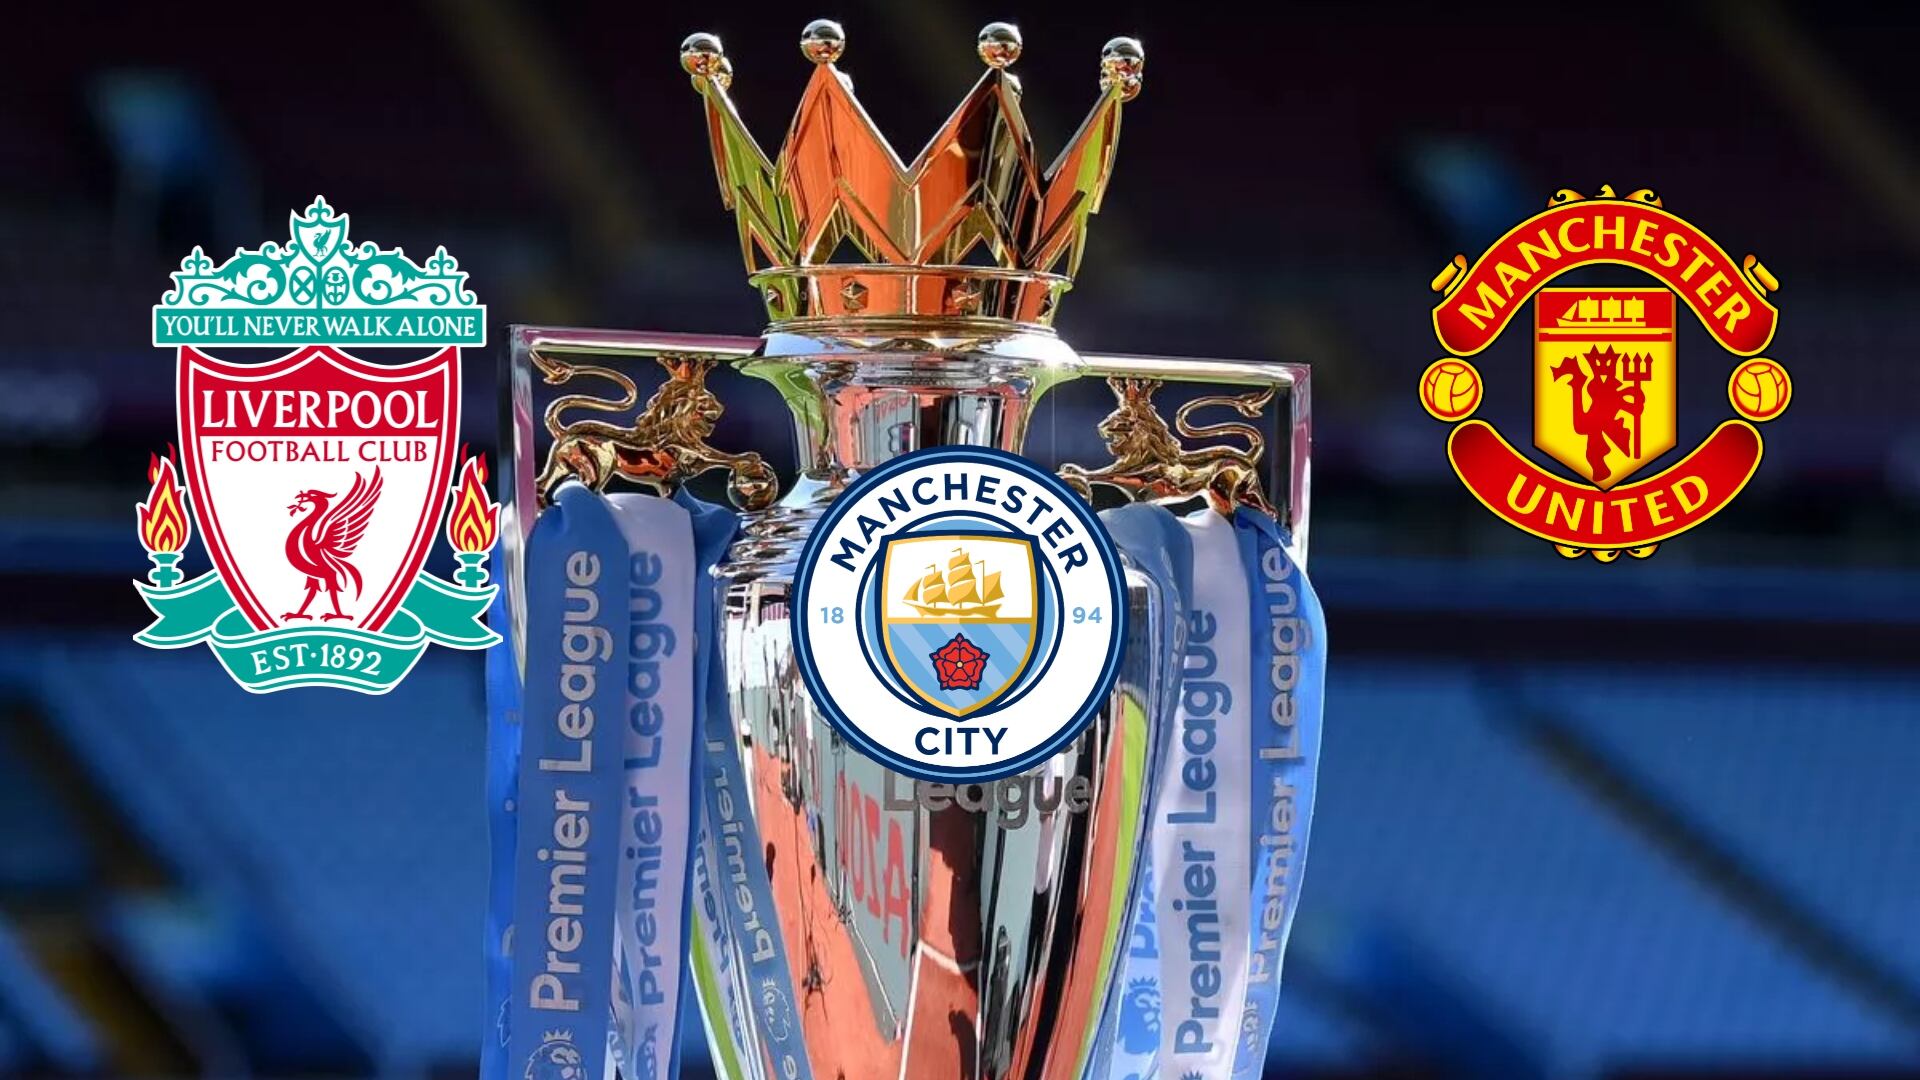 Wouldn't be the best idea, Premier League's proposal that could affect Man Utd, Man City, Liverpool and others